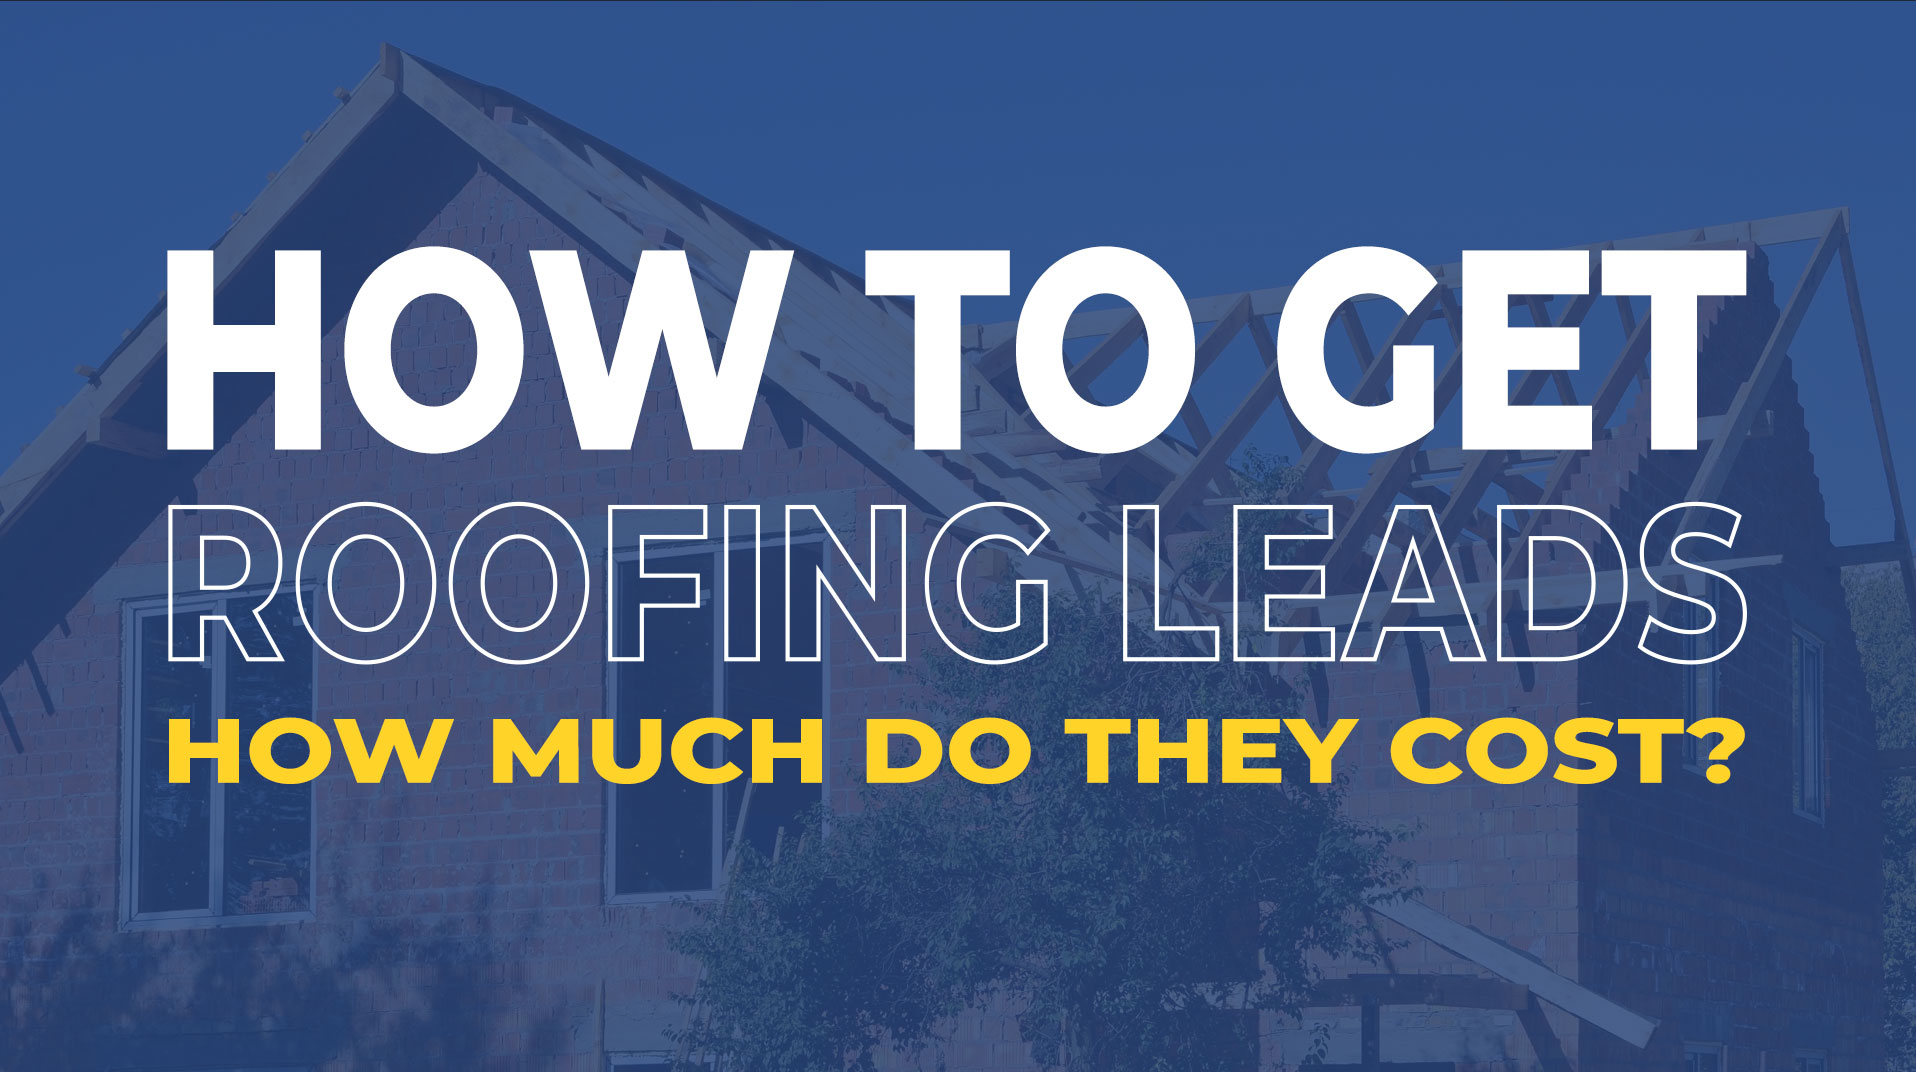 How Much does Roofing Leads Cost